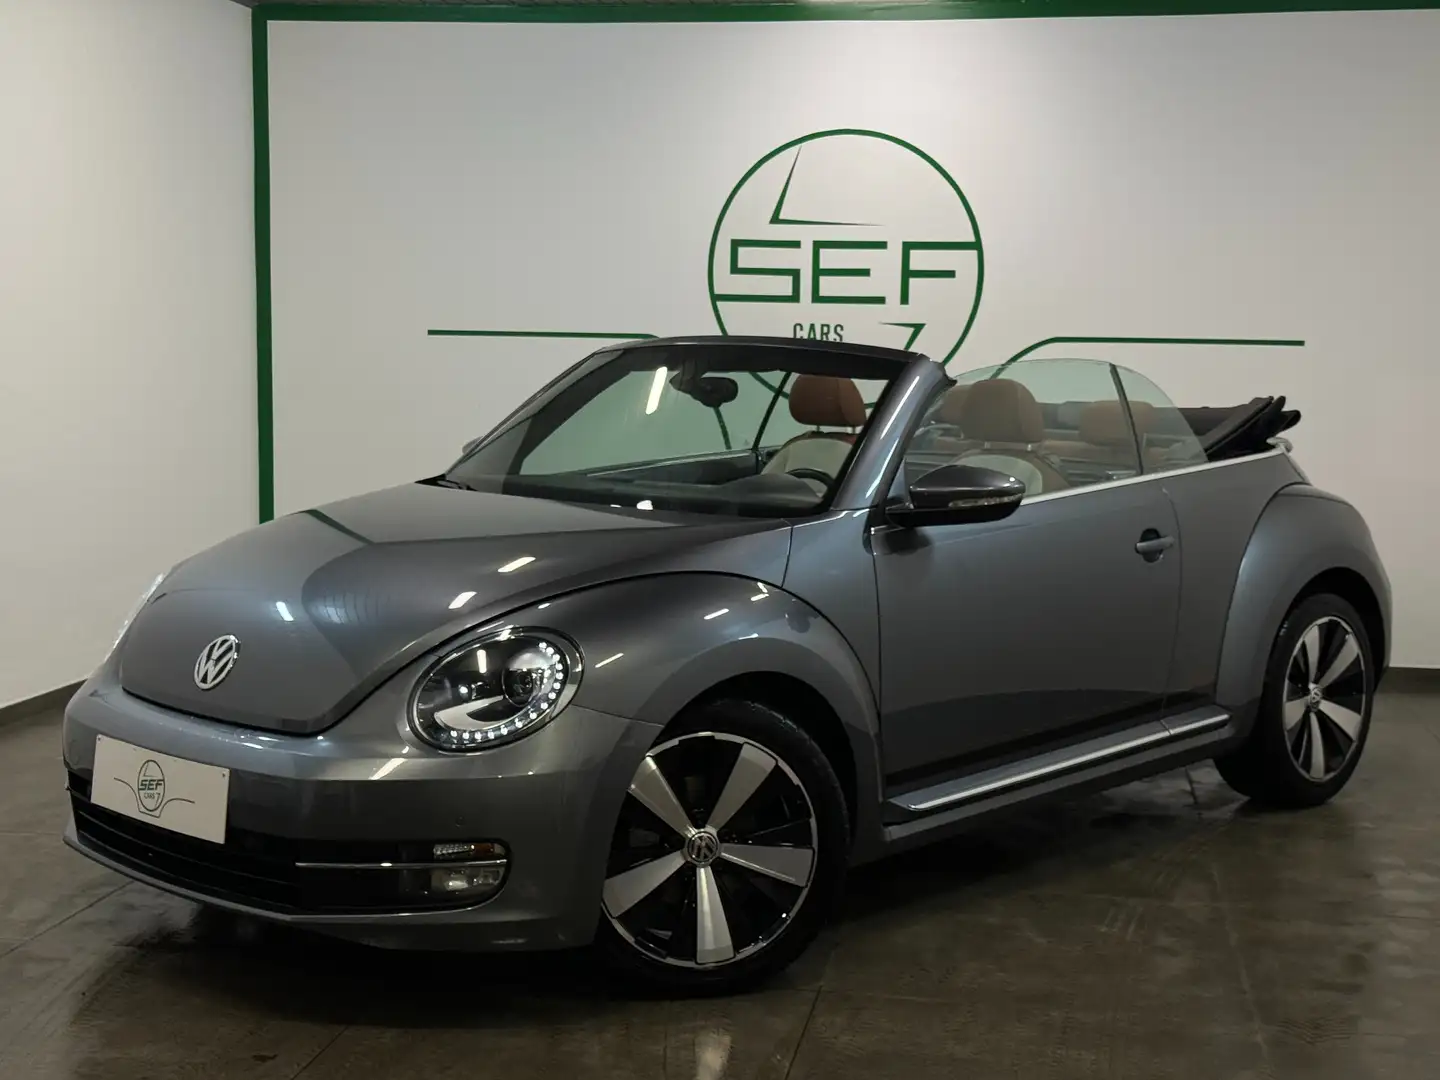 Volkswagen Beetle ** 1.6 CR TDi ** Editions Cup ** Gps ** A/C ** siva - 1